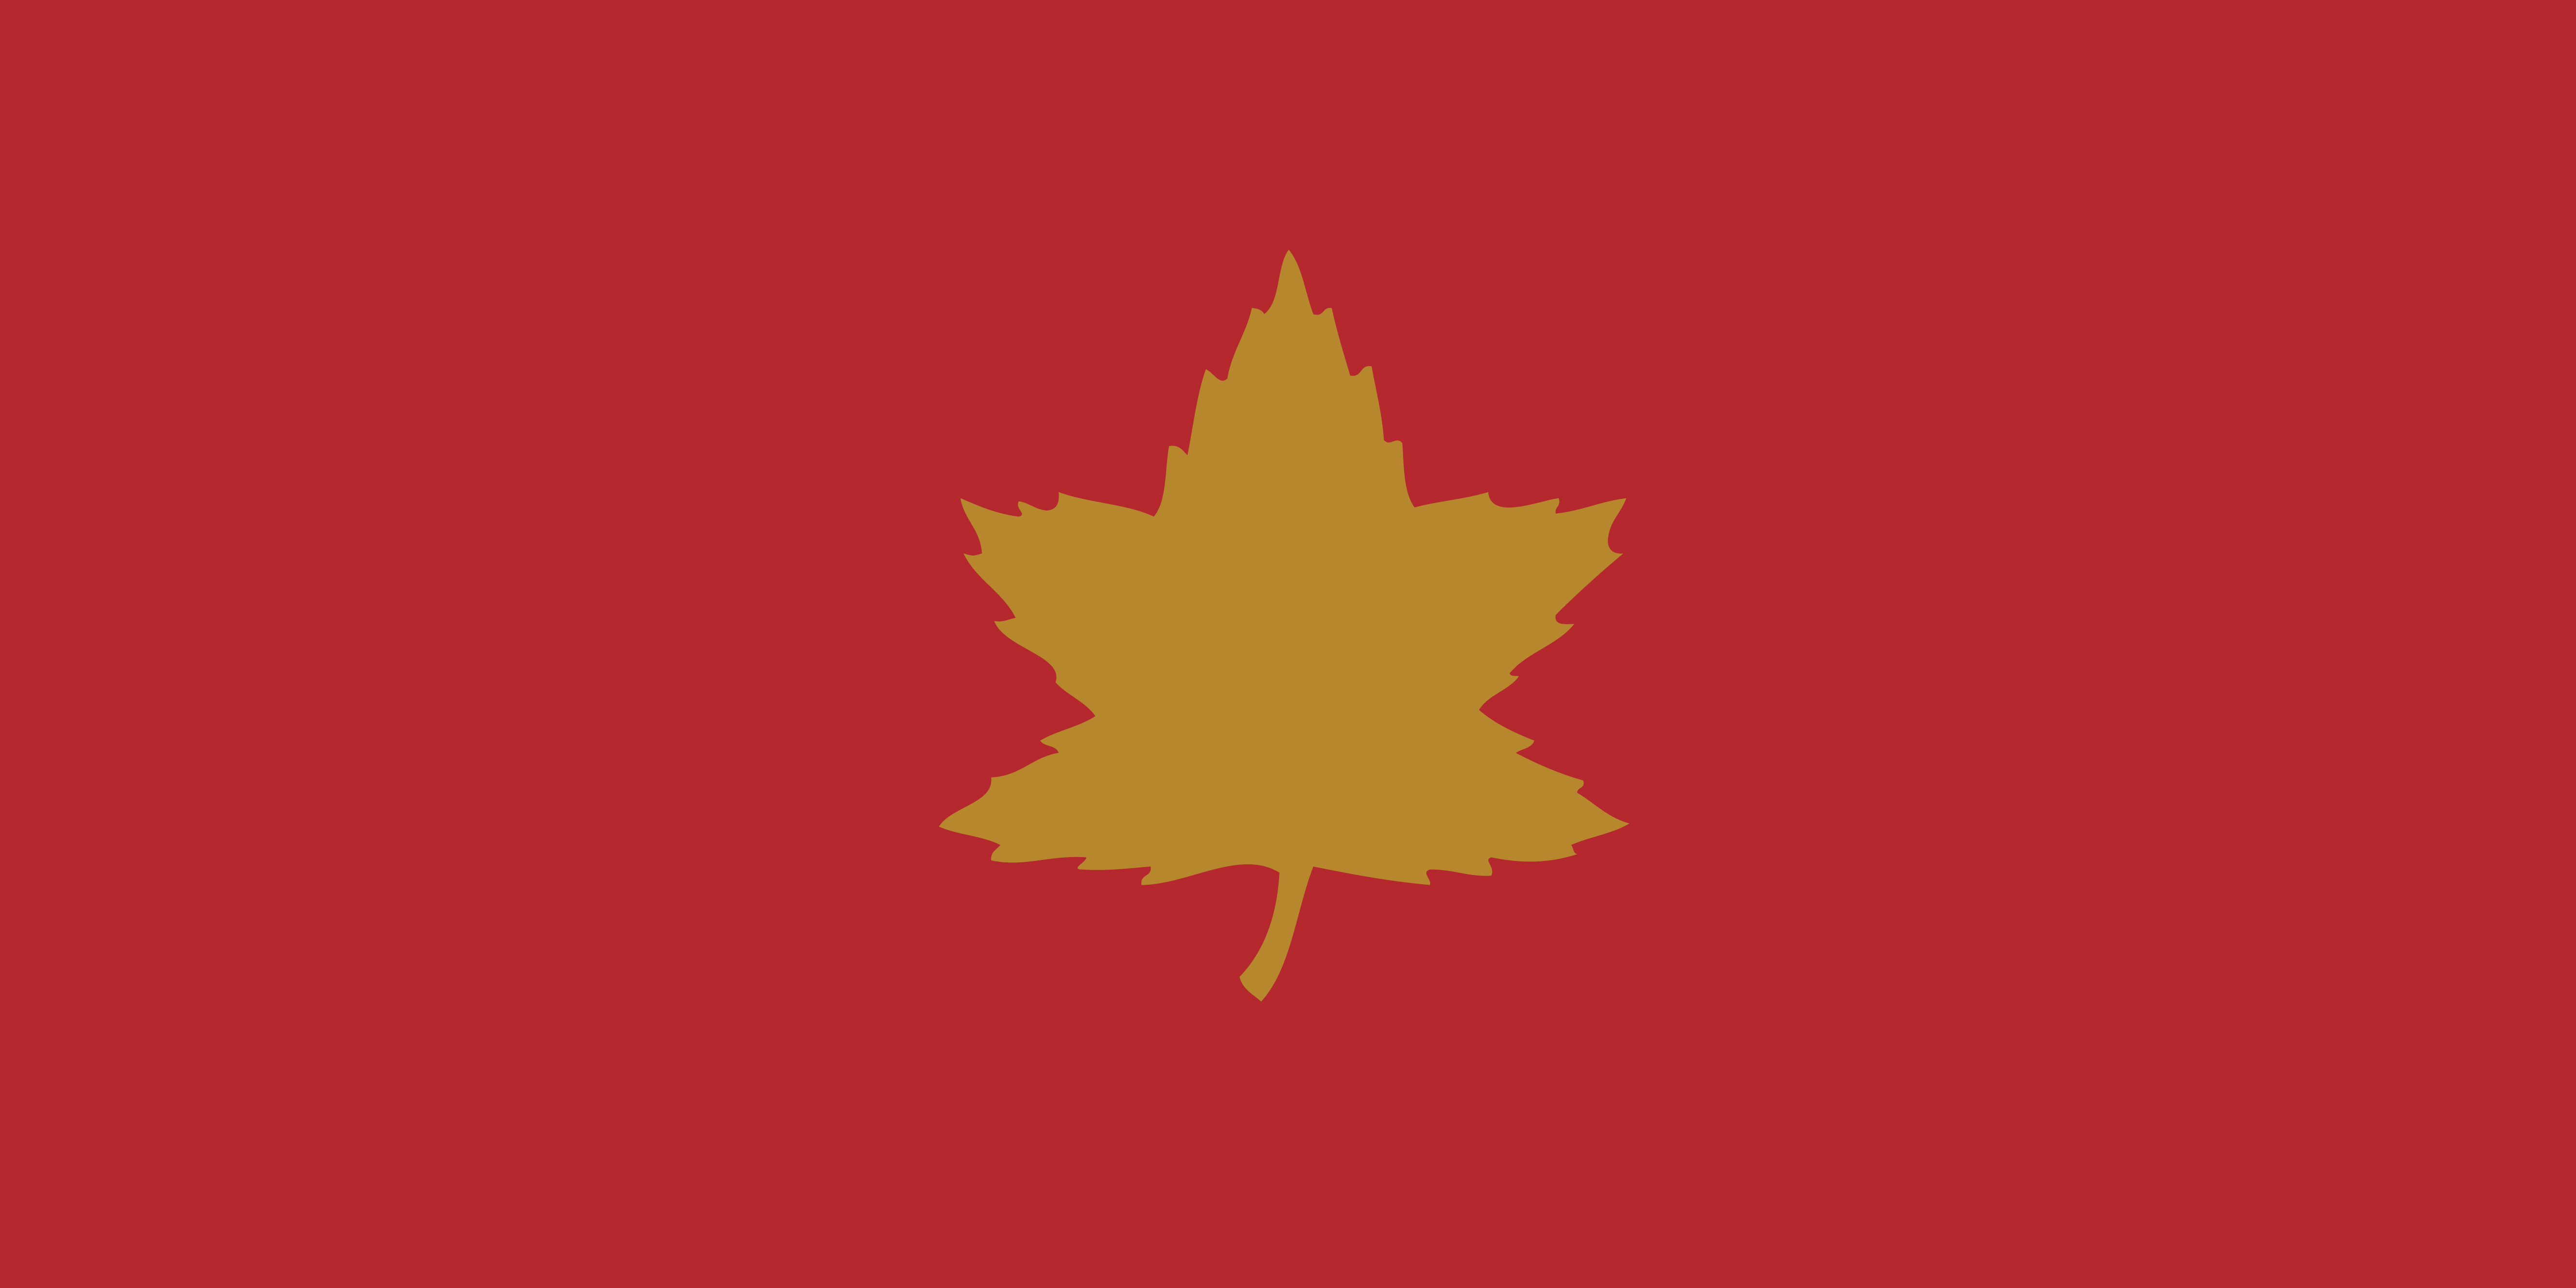 The badge is a brown/red rectangle with a golden maple leaf in the middle.